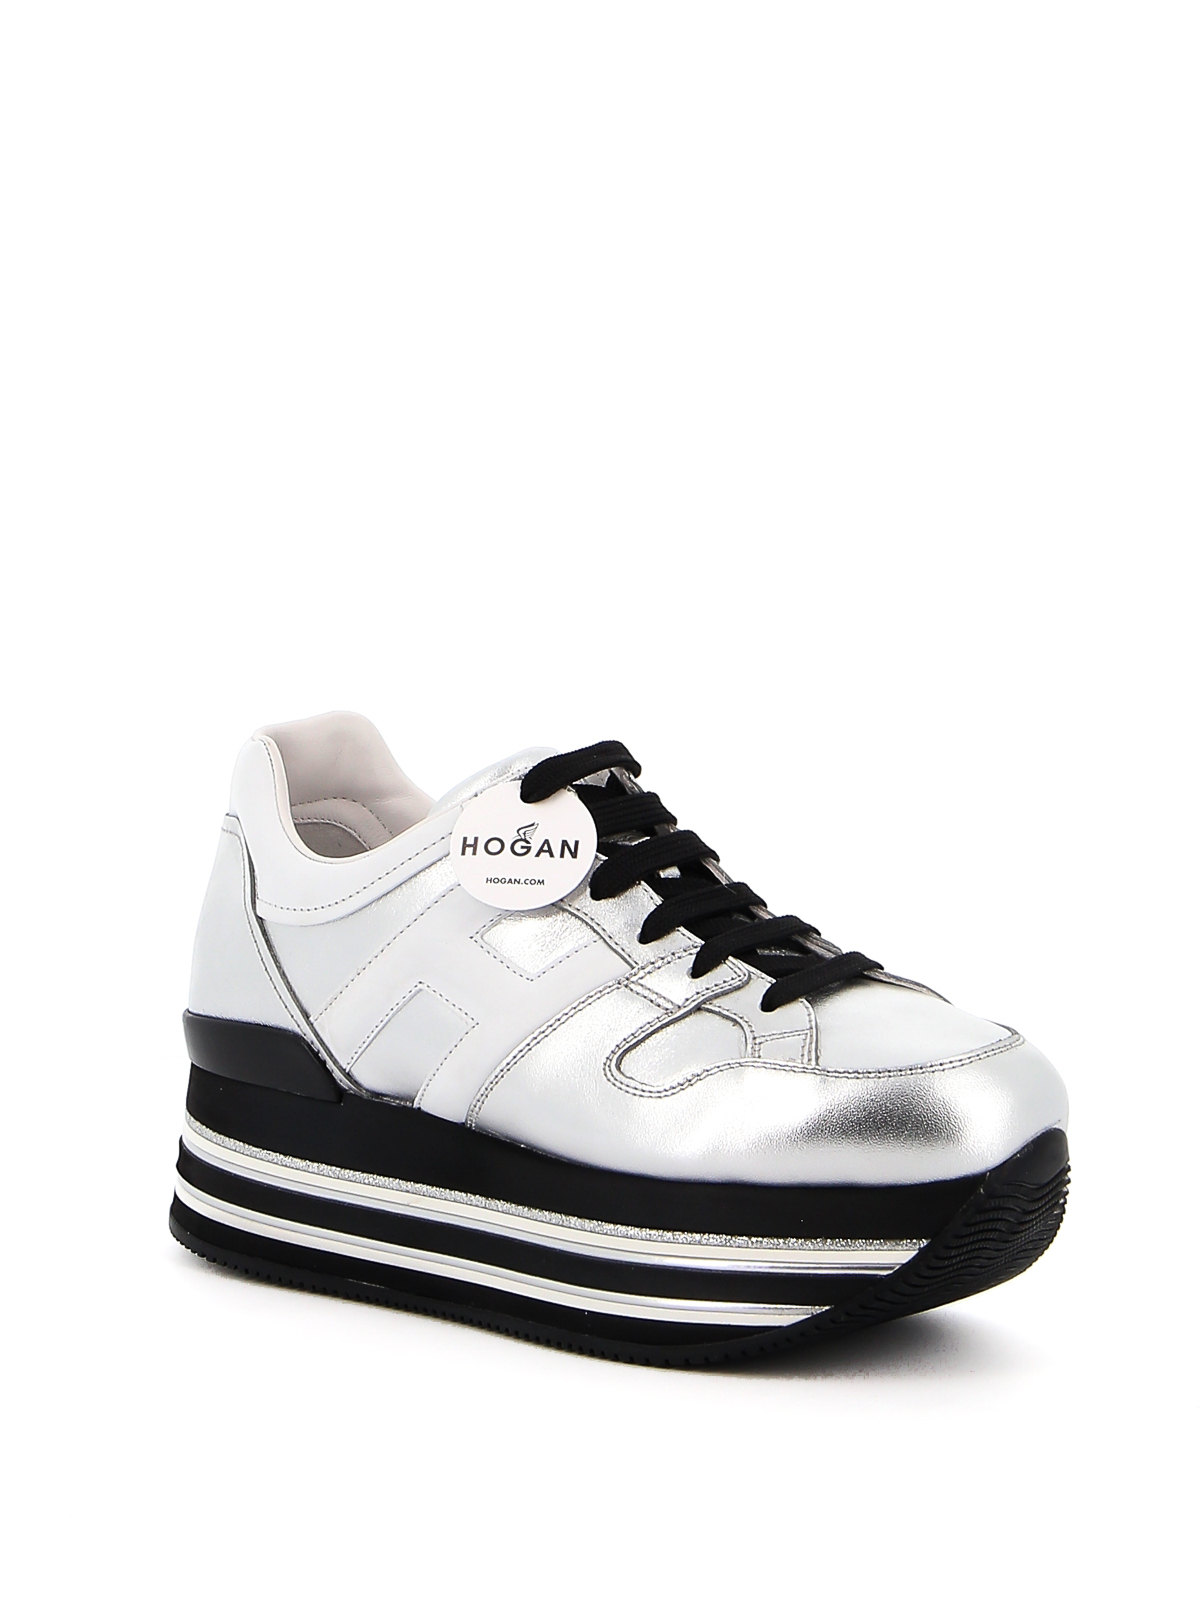 Trainers Hogan - Maxi Platform H222 leather sneakers - HXW5330T548I810906